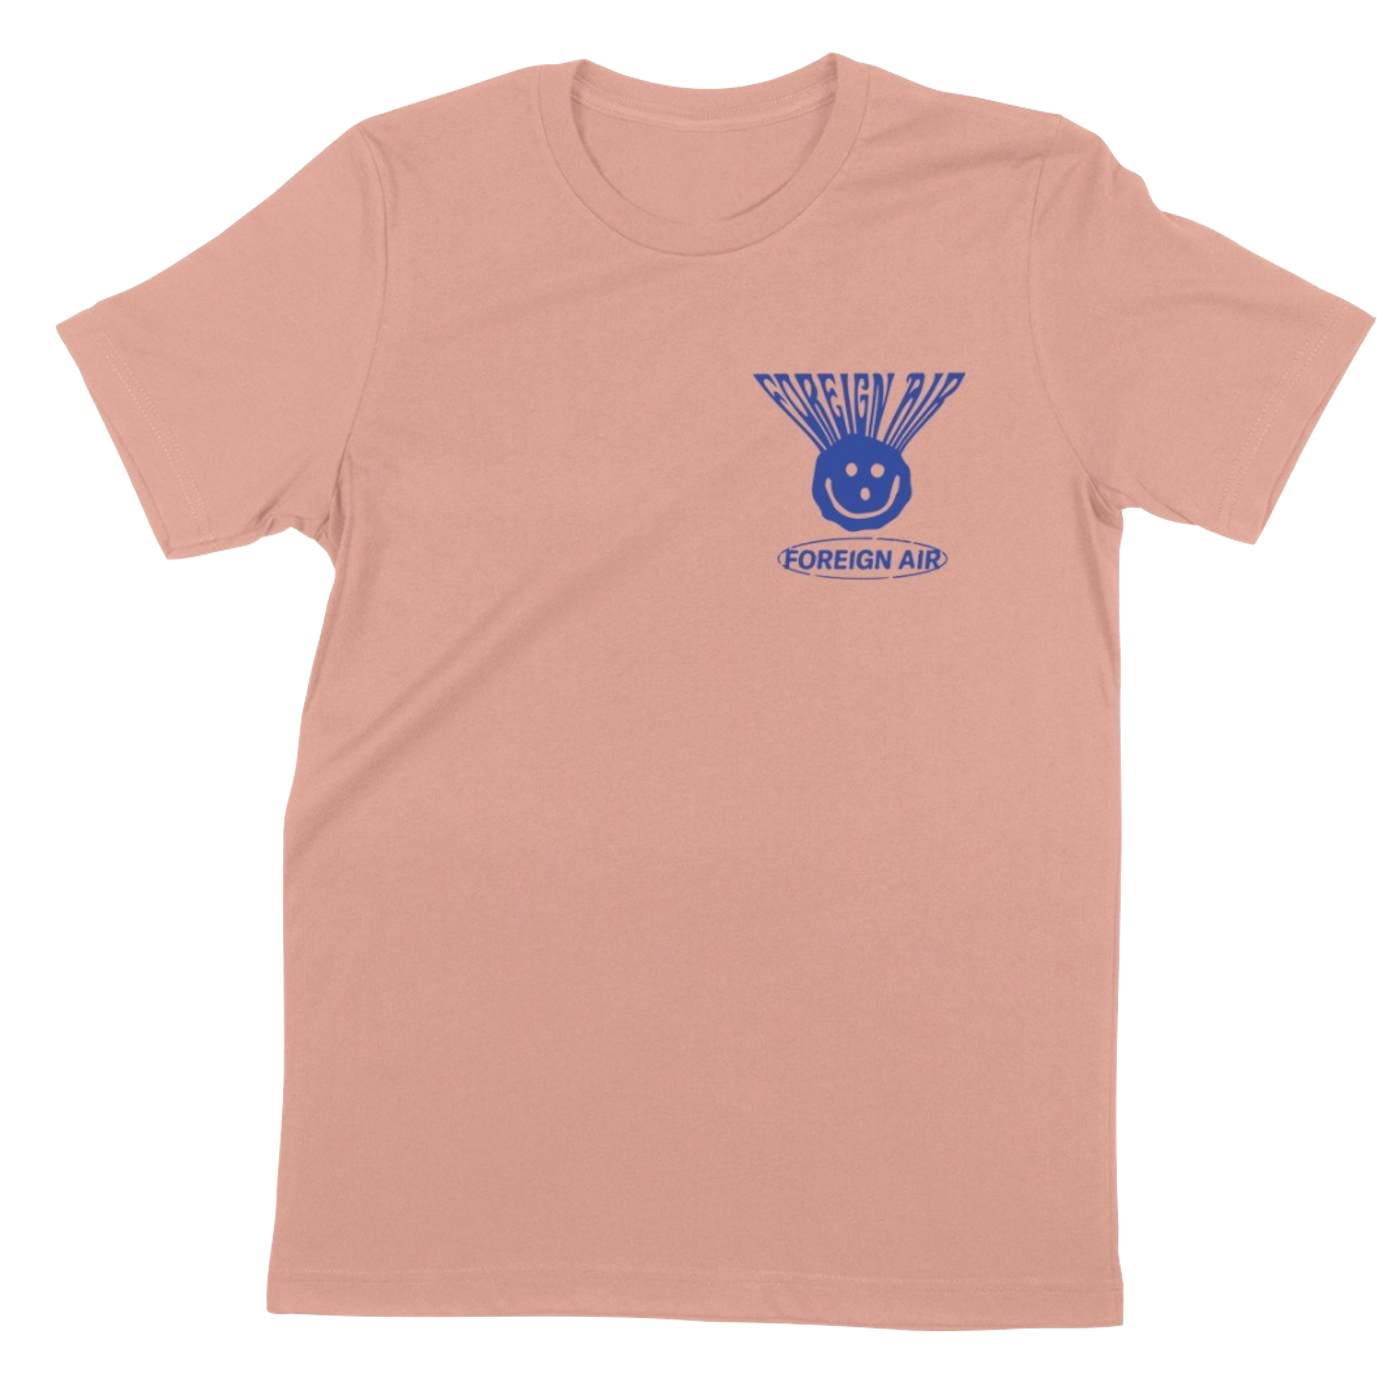 Foreign Air Exclusive Dusty Rose Tee